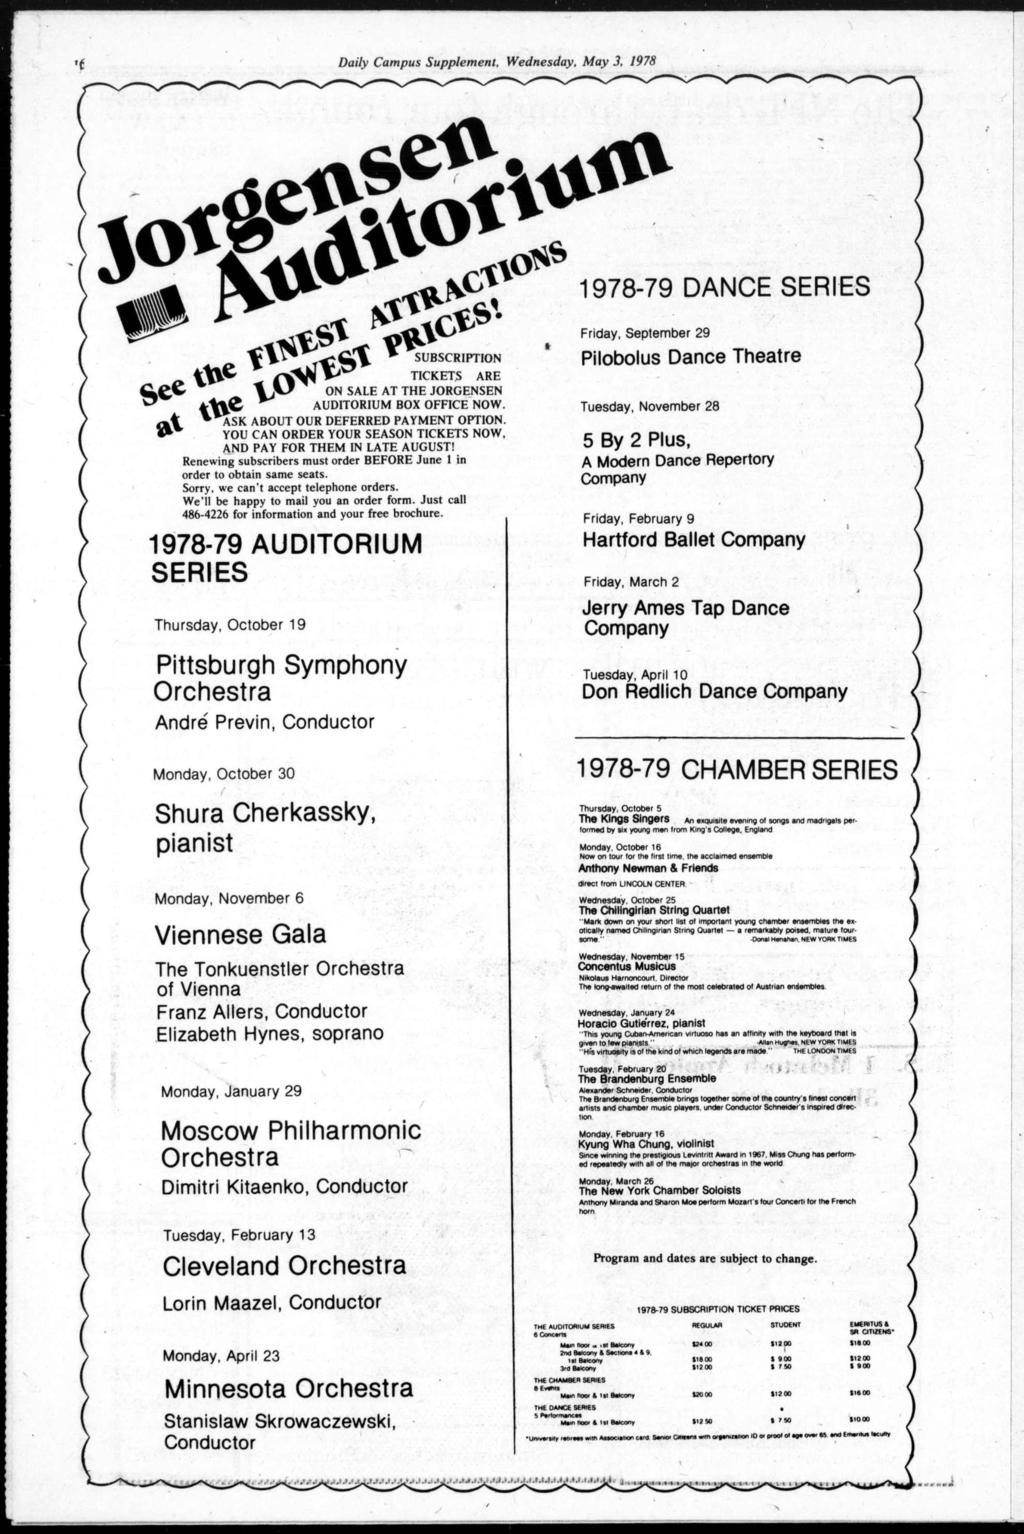 Daly Campus Supplement, Wednesday, May 3, 1978 * &. *mj&l 1978-79 DANCE SERES SUBSCRPTON TCKETS ARE ON SALE AT THE JORGENSEN AUDTORUM BOX OFFCE NOW. ASK ABOUT OUR DEFERRED PAYMENT OPTON.